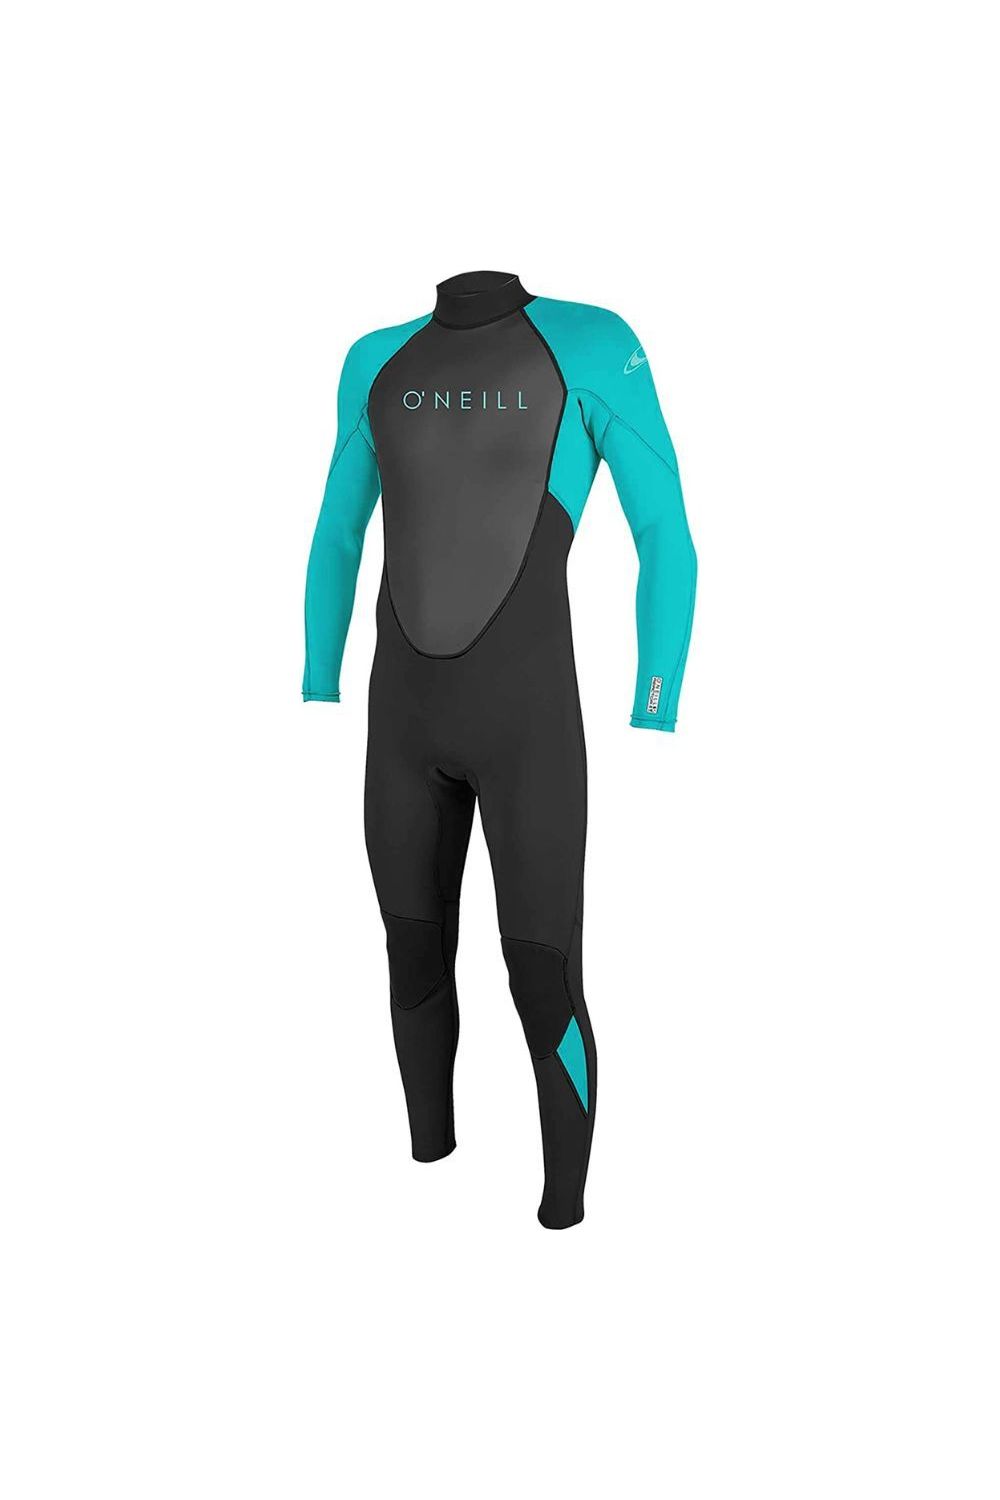 O'Neill Reactor 2 Youth 3/2 Wetsuit With Back Zip In Black & Aqua